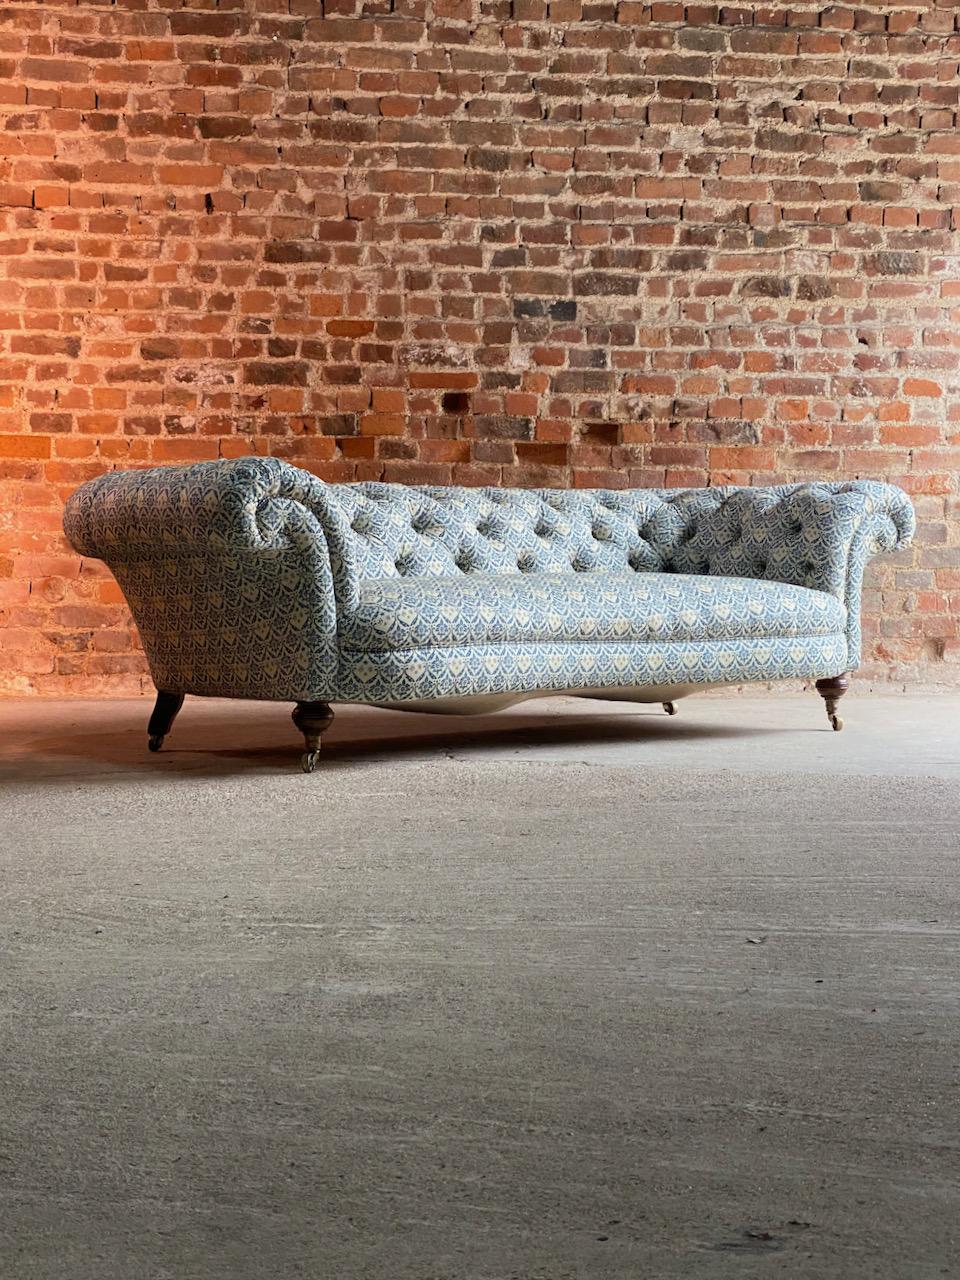 Howard & Sons chesterfield sofa, 19th century, circa 1850

Magnificent large and imposing 19th century Howard & Sons Country House Chesterfield button backed three-seat sofa England, circa 1850, serpentine fronted with exceptional size and